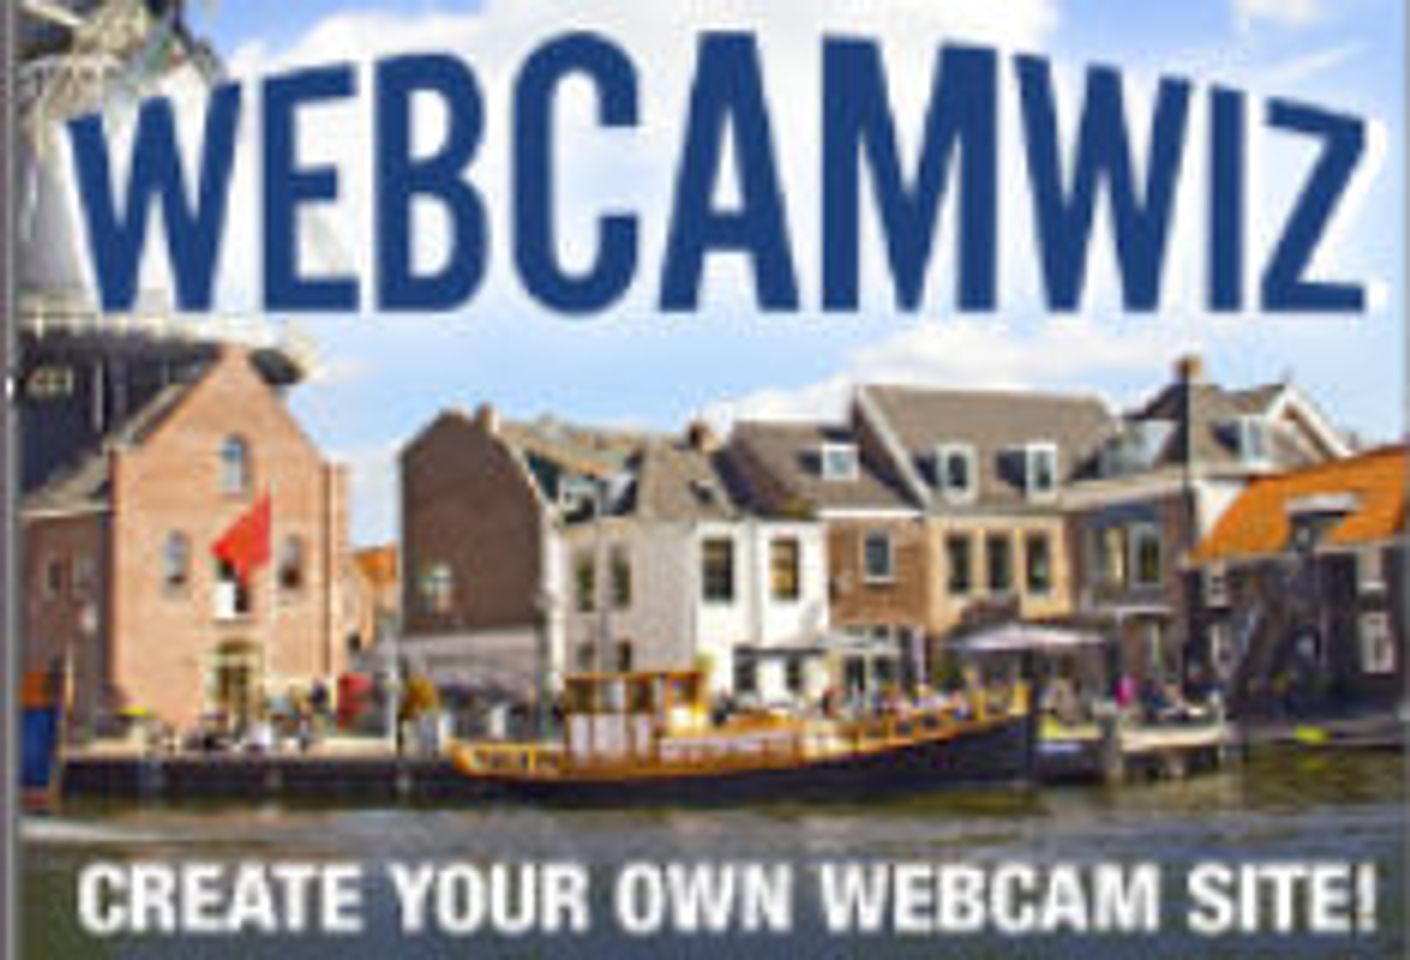 WebCamWiz Debuts Enhanced Website for the New Year